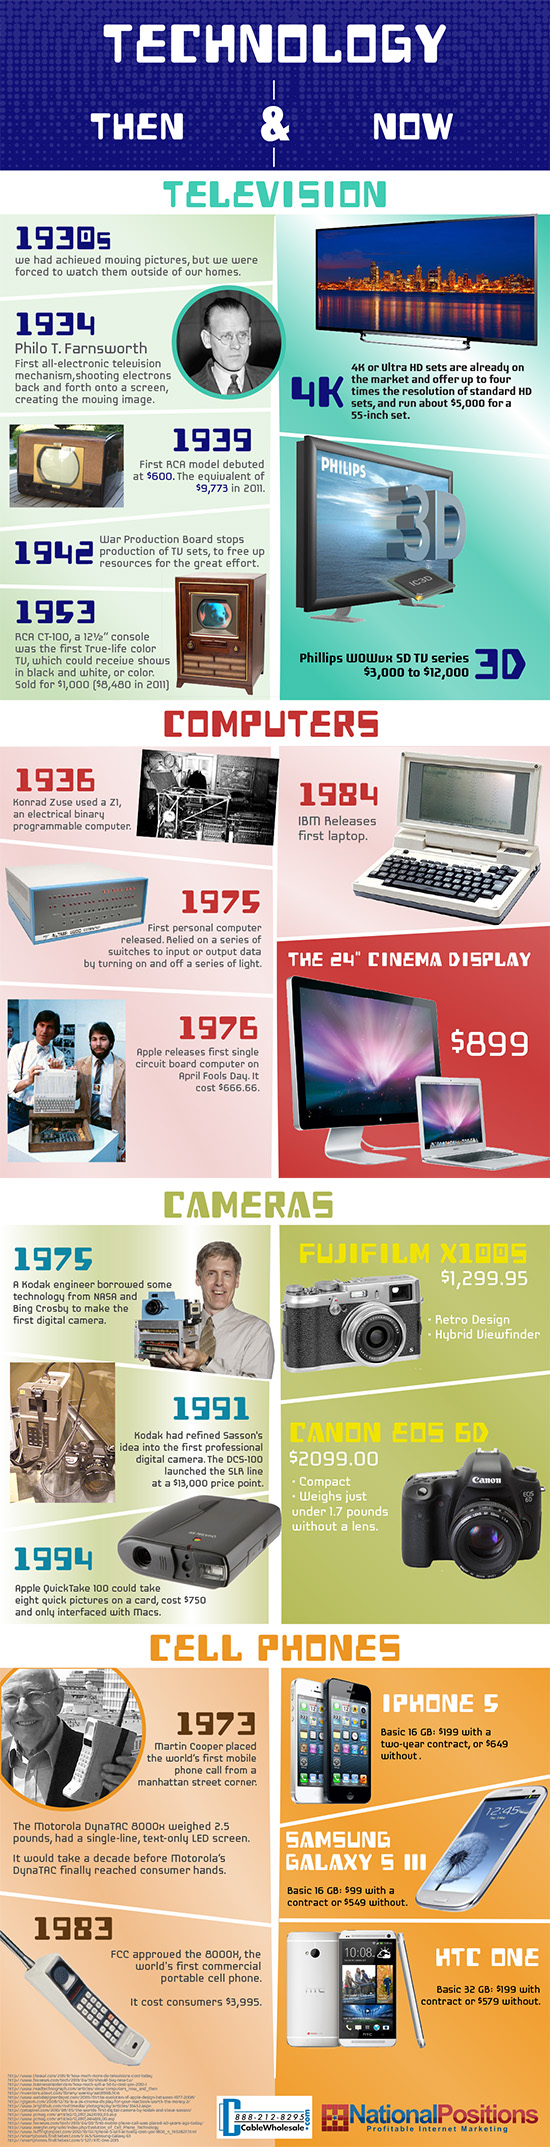 Technology Then and Now